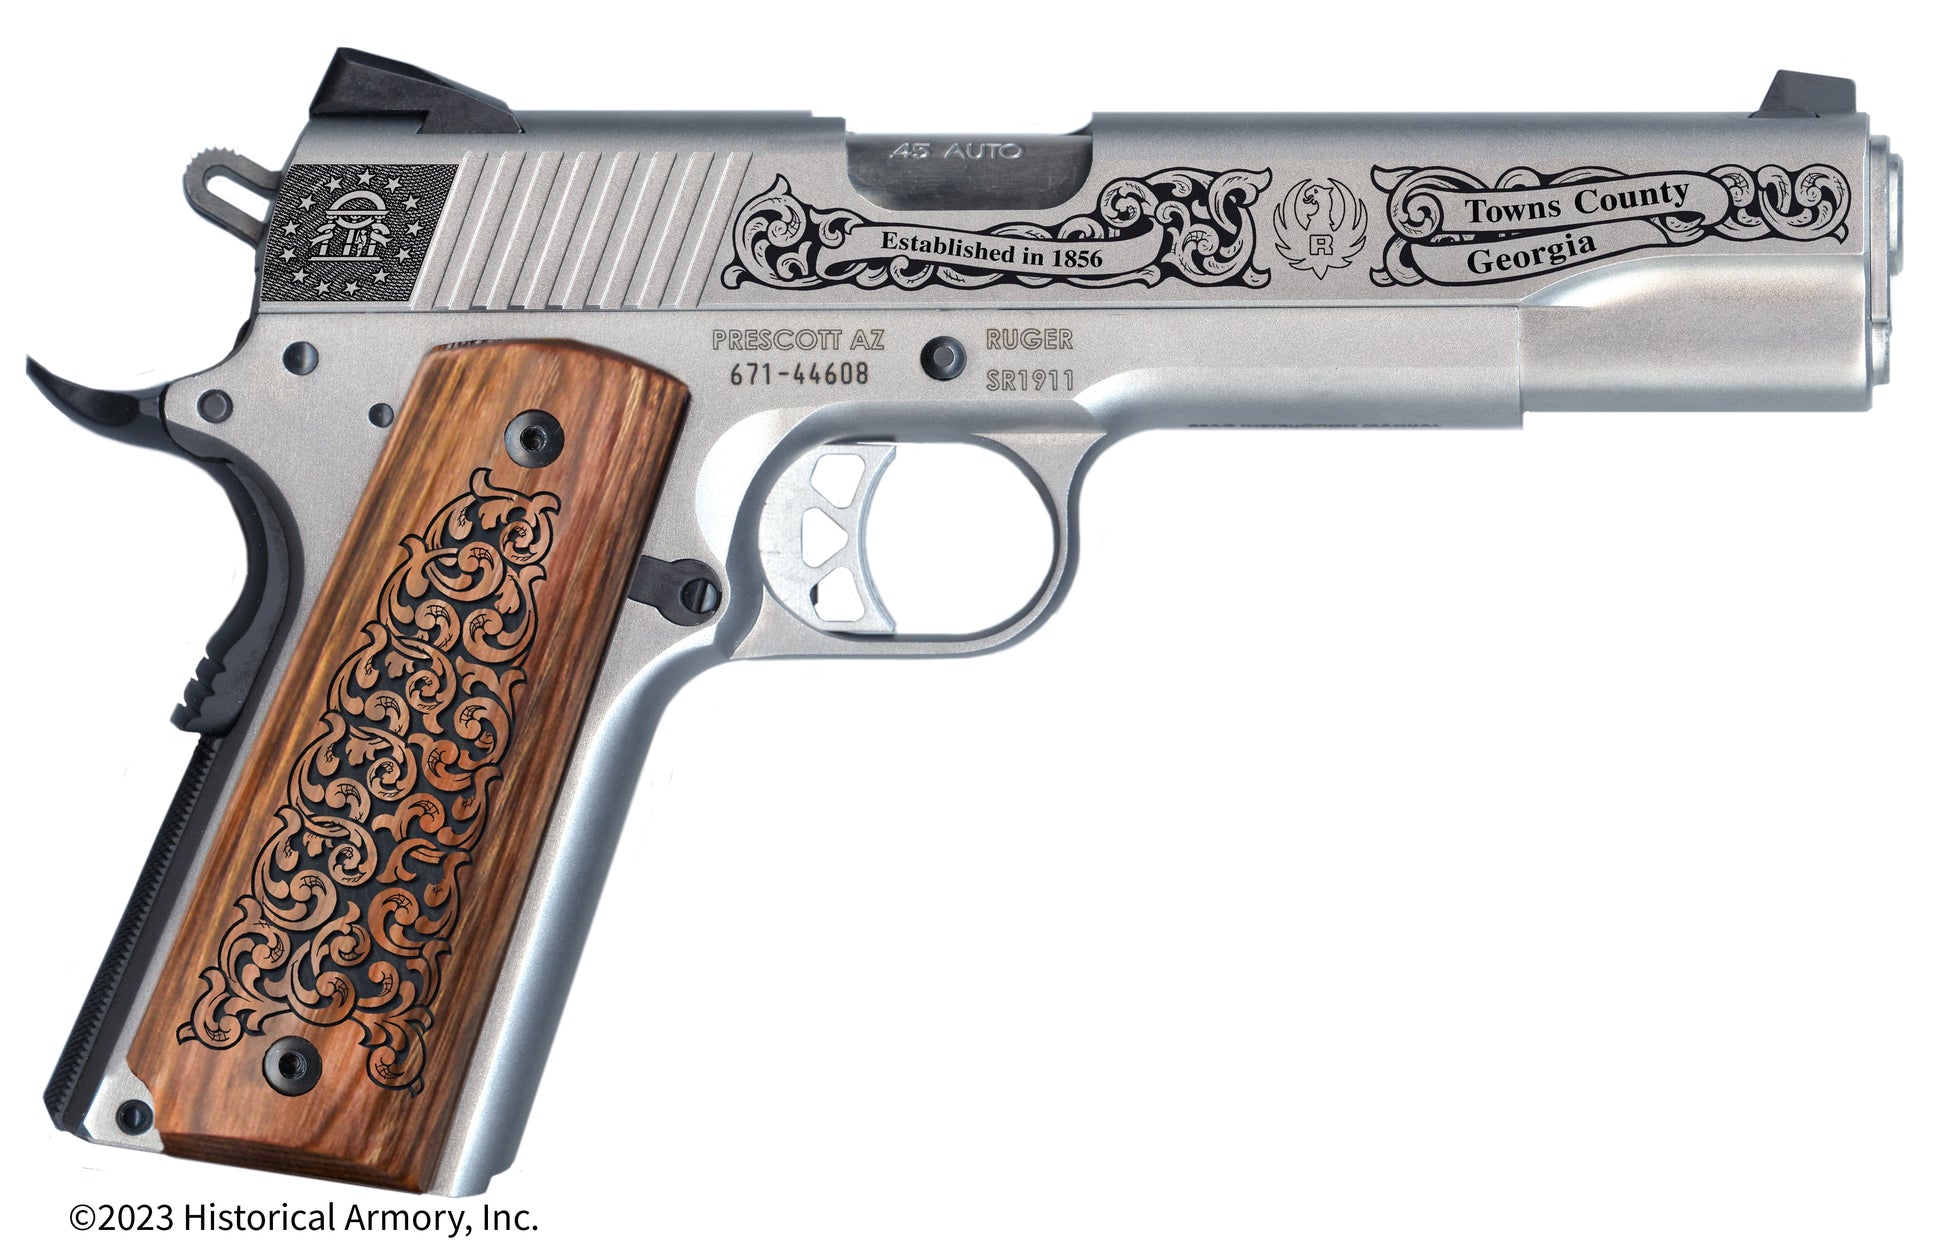 Towns County Georgia Engraved .45 Auto Ruger 1911